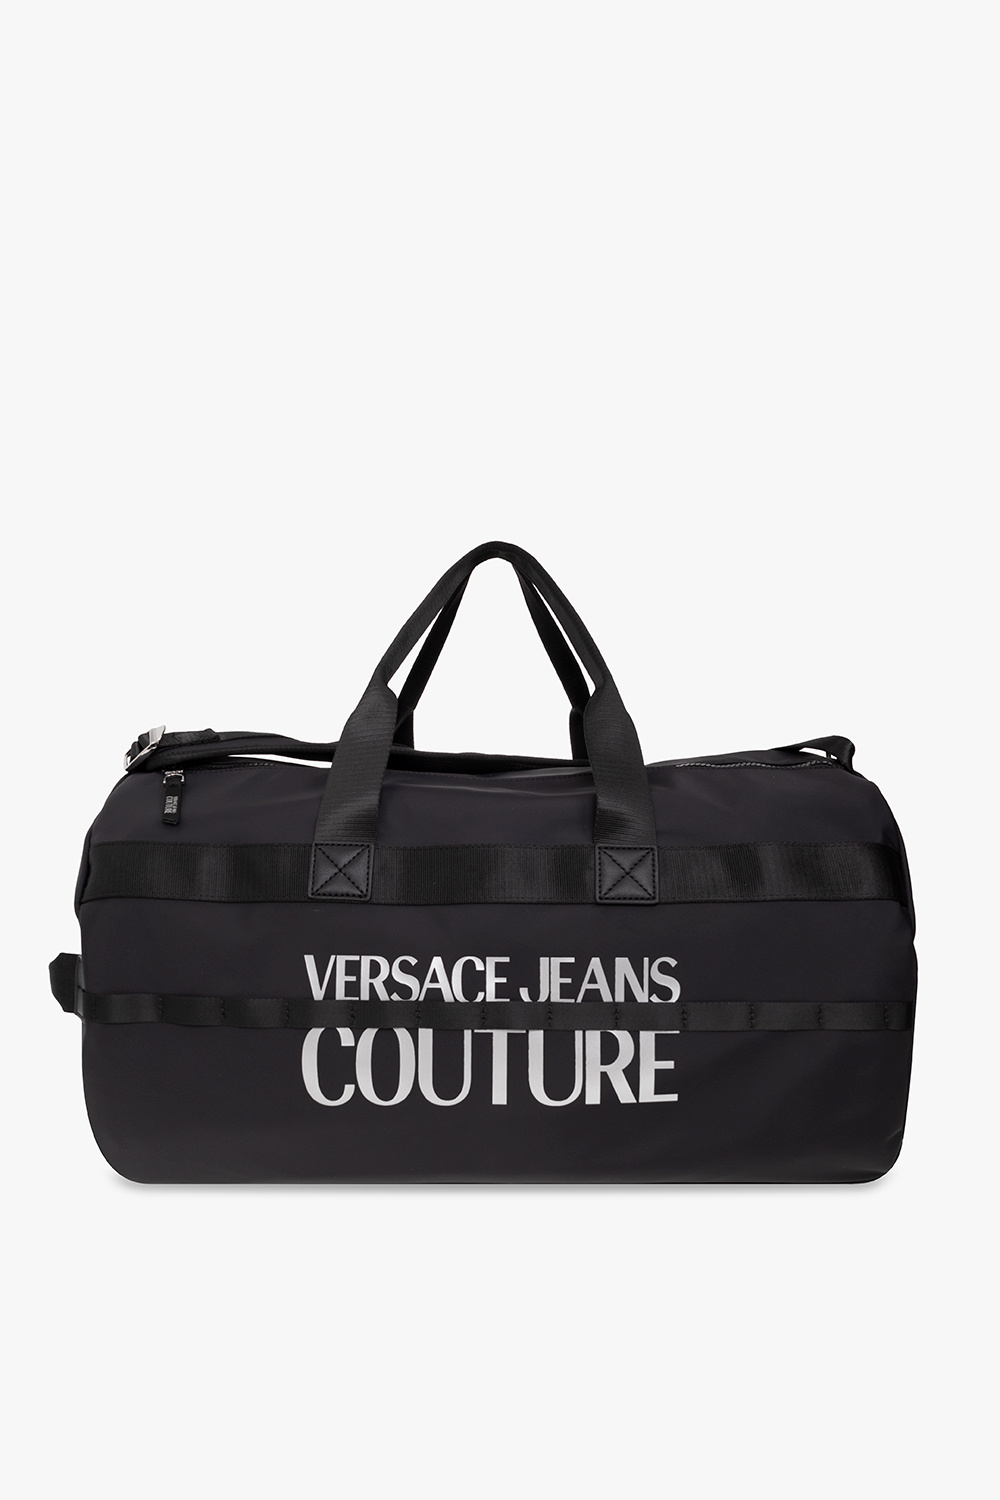 Versace Jeans Couture Travel bag with logo